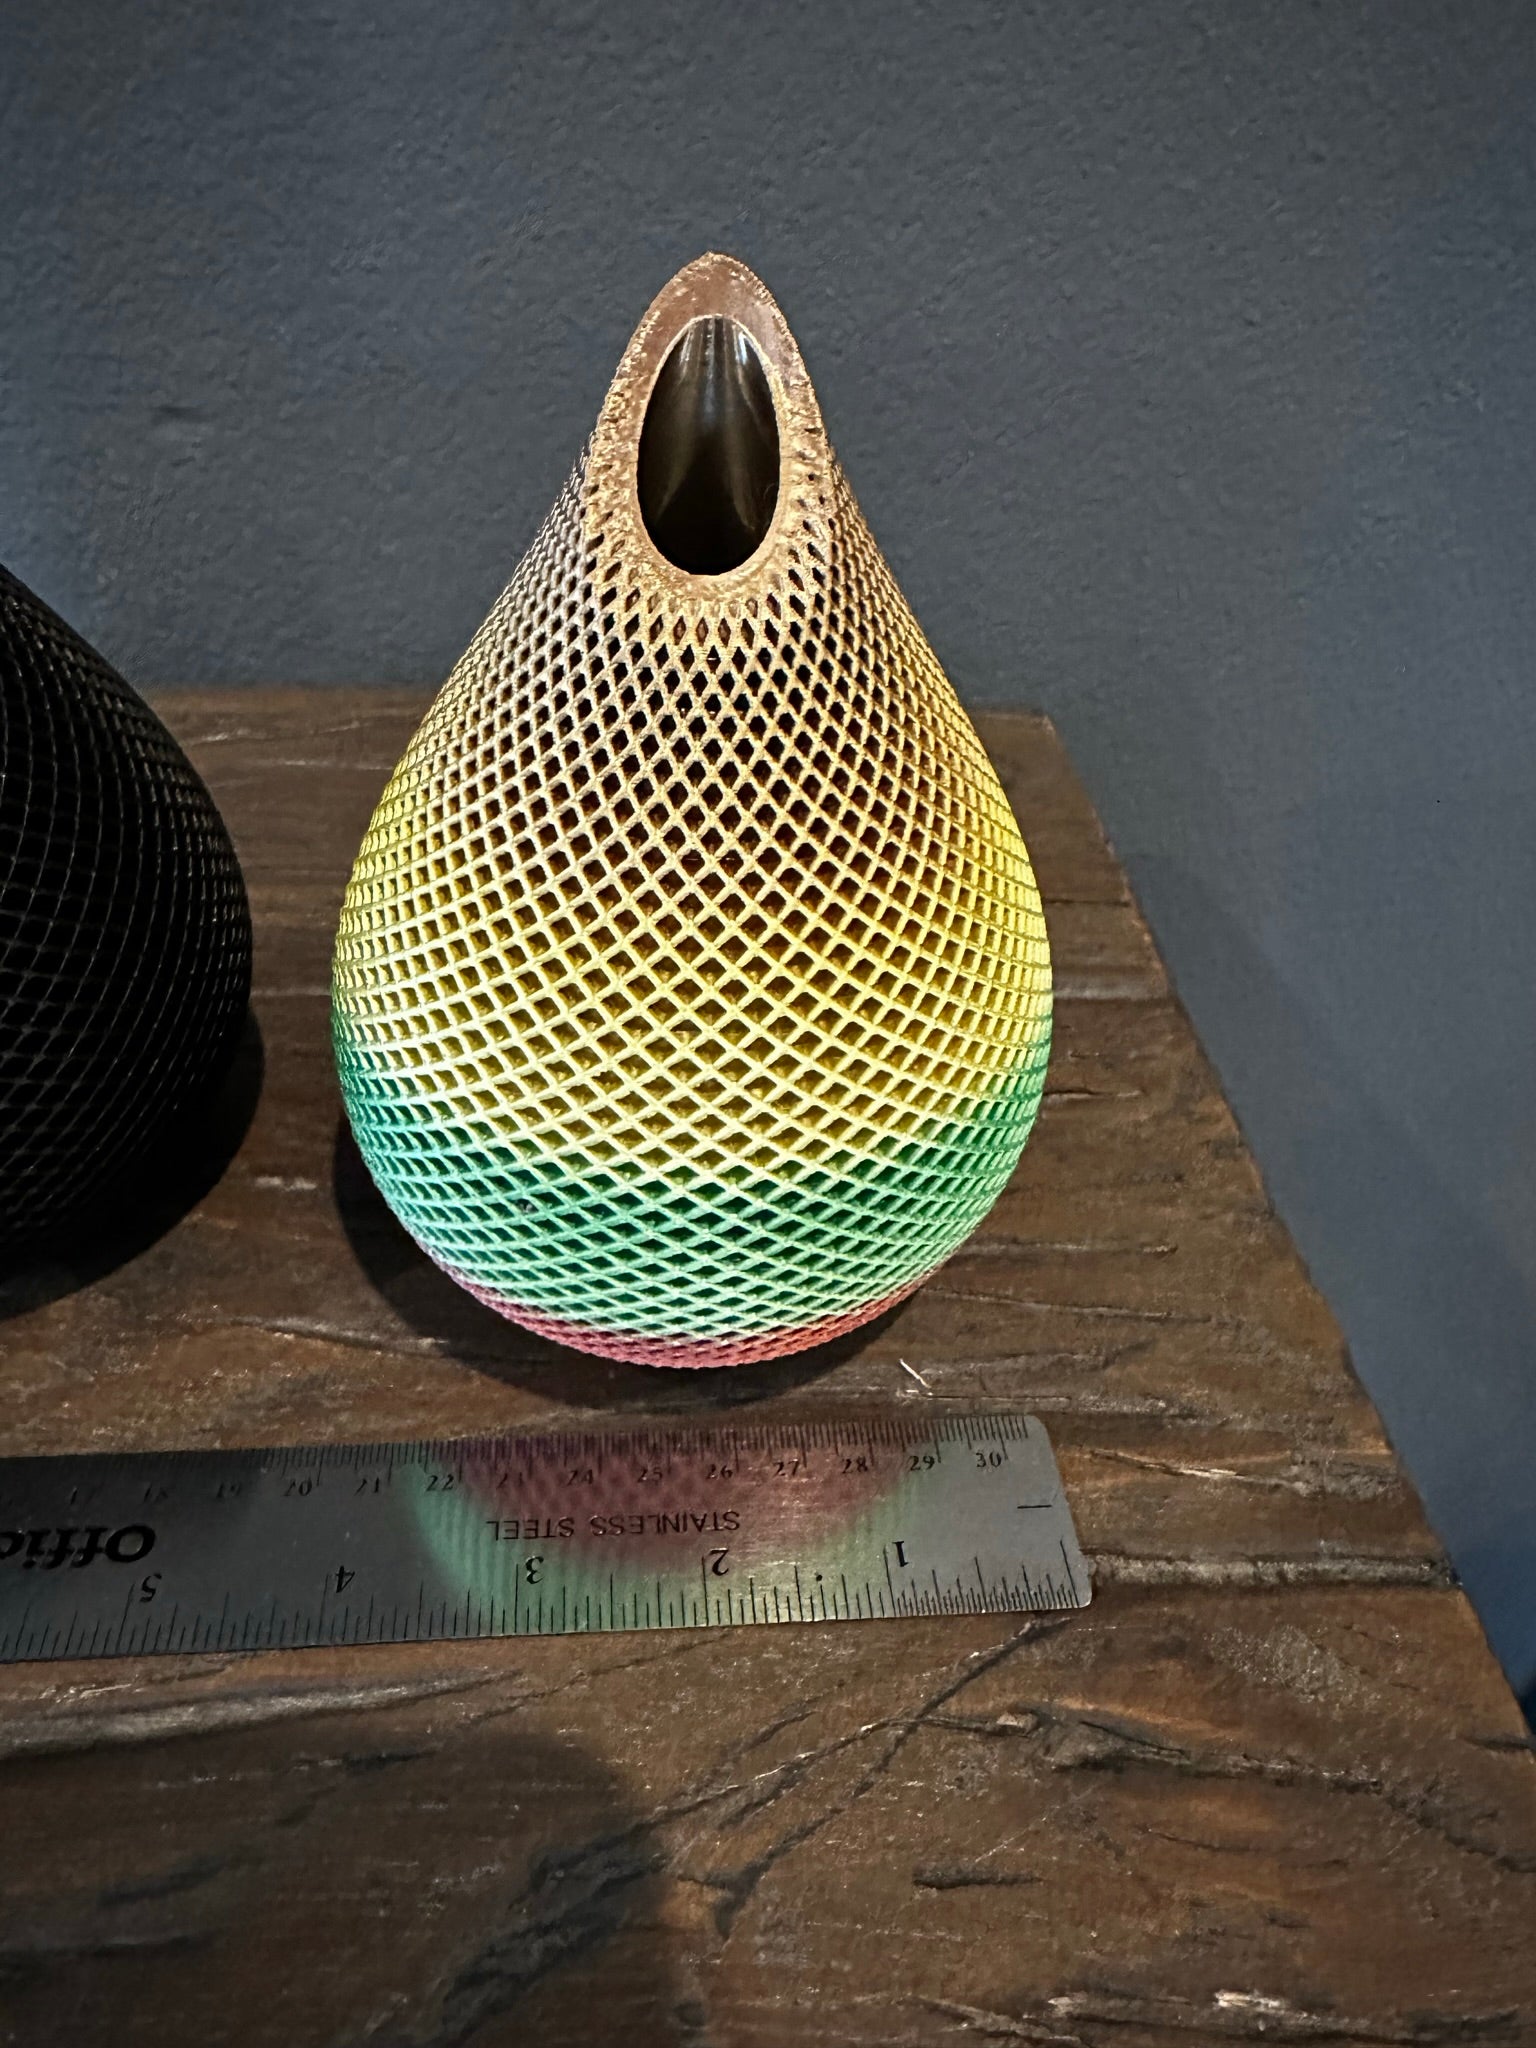 Photo of Handmade 3D Printed Vase in Rainbow Color with Mesh Pattern showing its measurements of approximately 4 inches wide